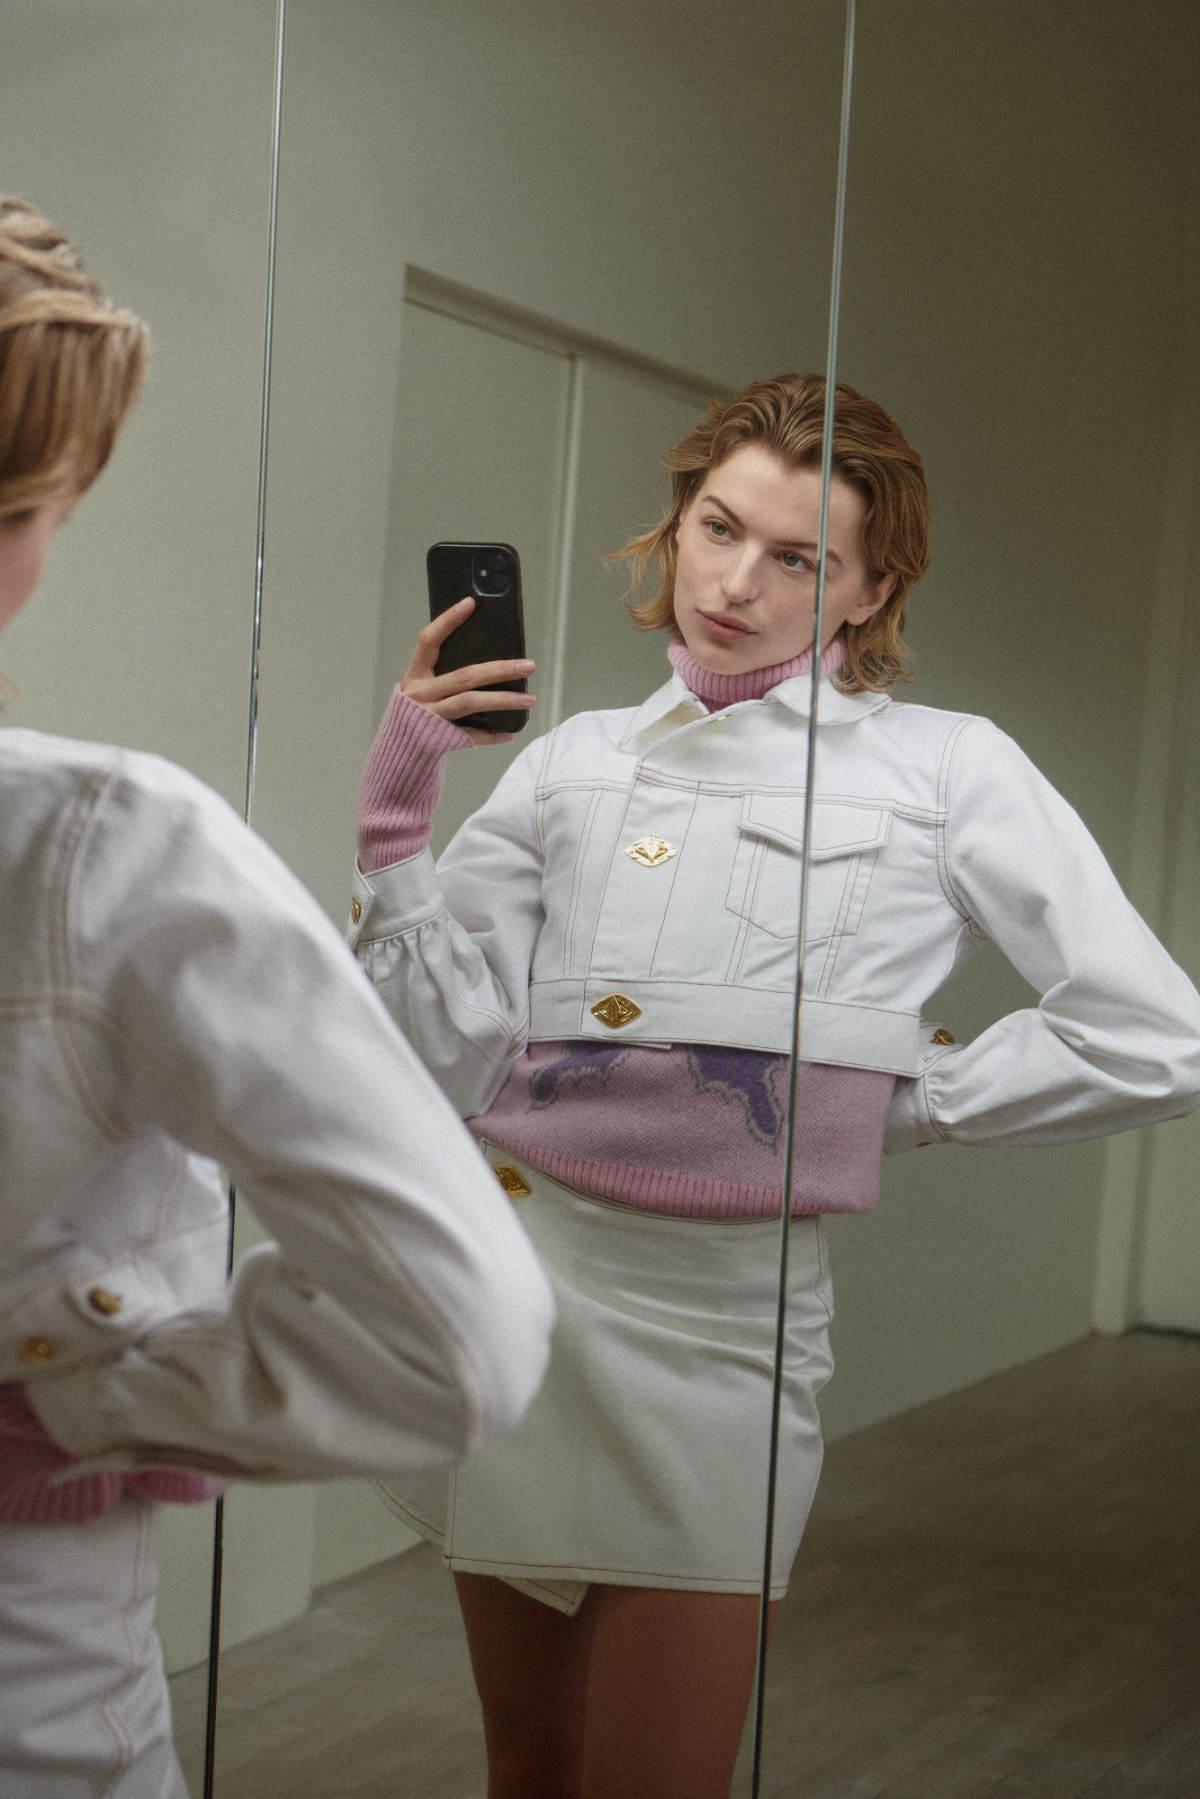 Ganni Presents Its New Pre-Spring 2023 Collection: “I’ll Be Your Mirror”